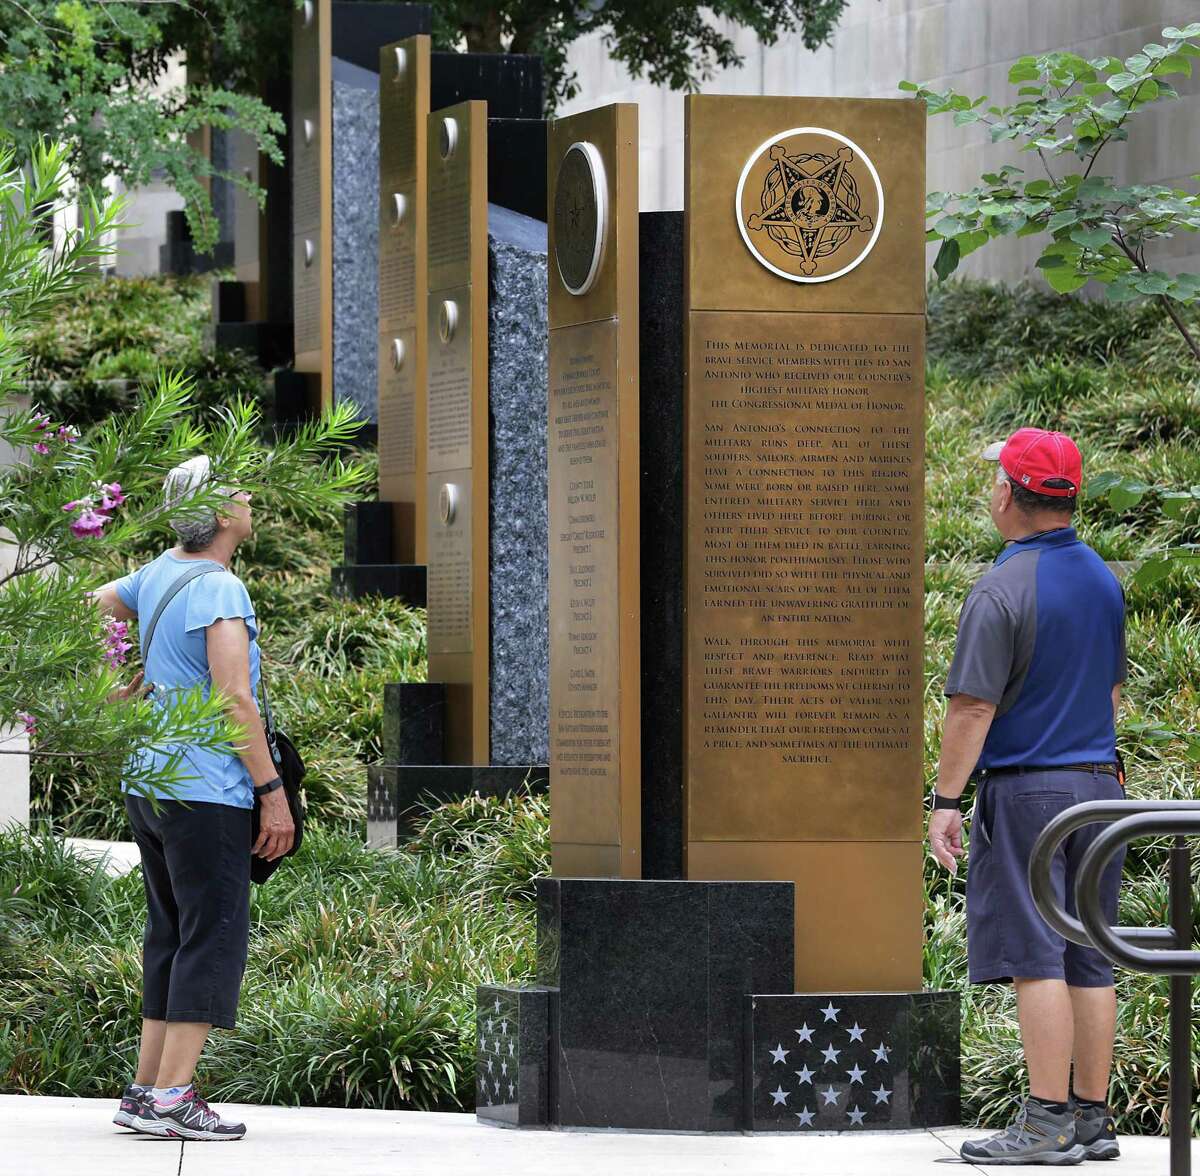 A couple stops and reads the inscriptions on the Medal of Honor Portal on the Riverwalk near the Tobin Center for the Performing Arts, one of many military monuments in San Antonio.